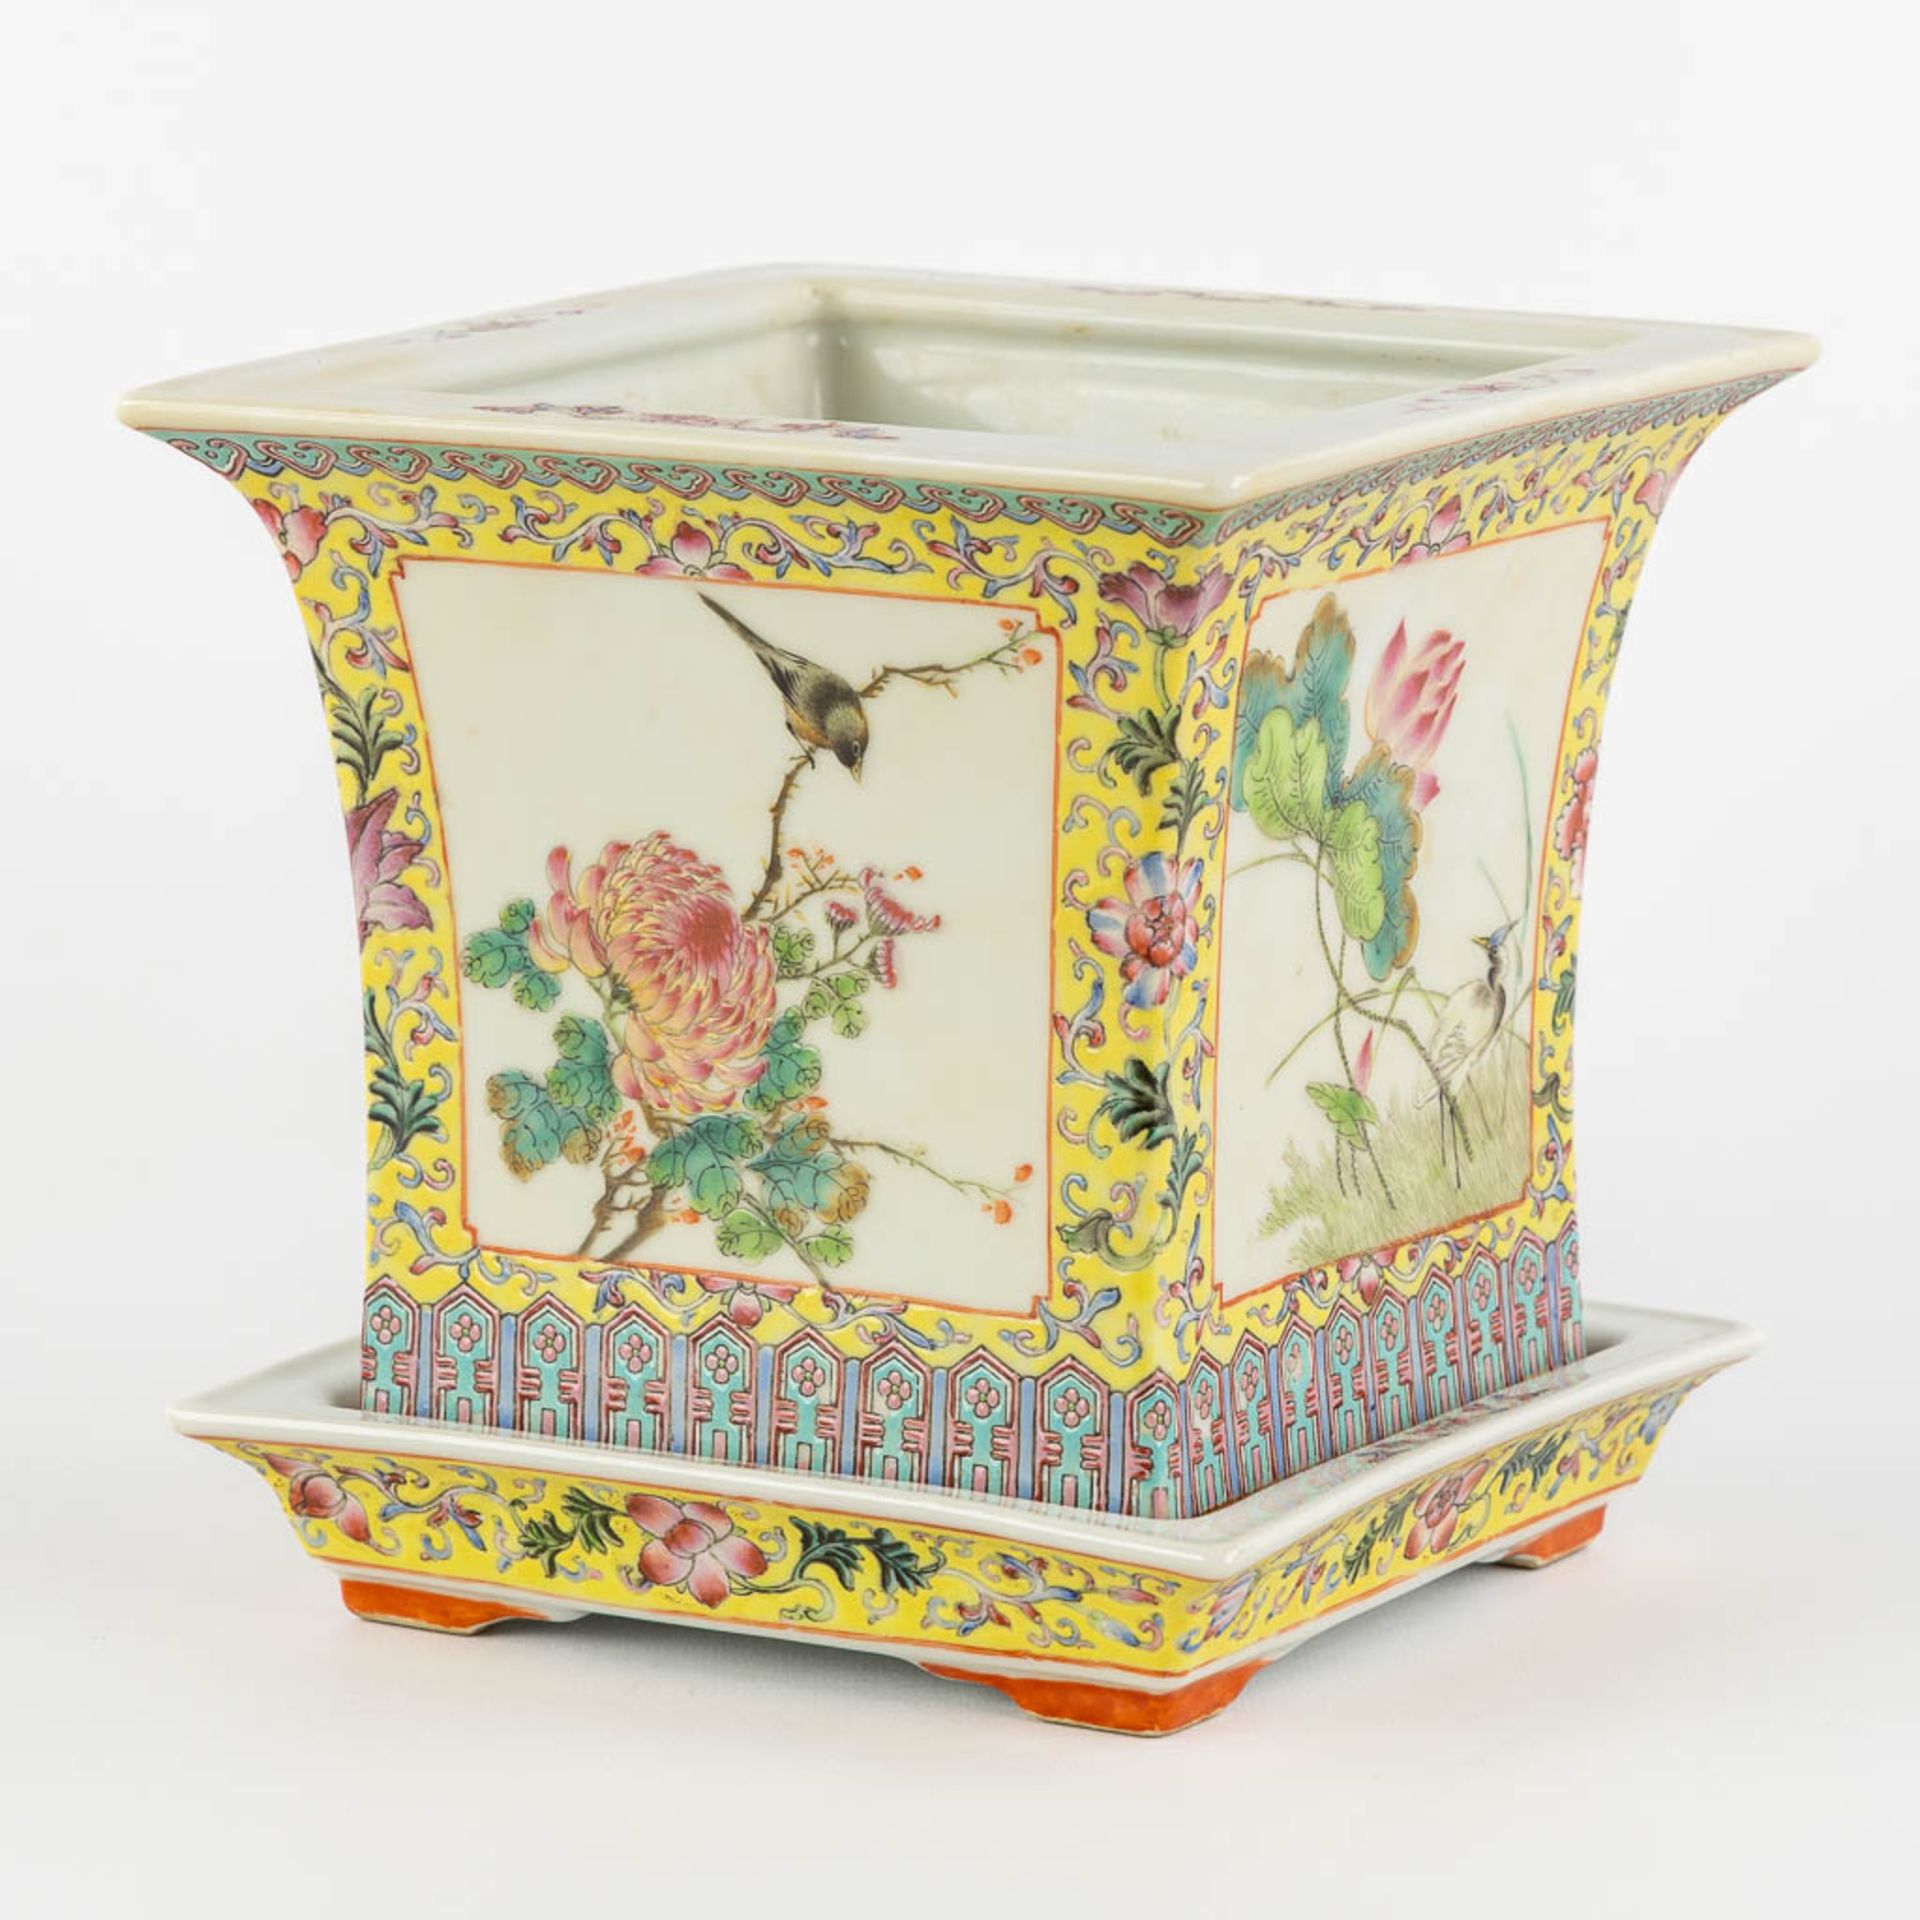 A Chinese Cache Pot, Famille Rose decorated with fauna and flora. (L:18 x W:18 x H:17,5 cm)